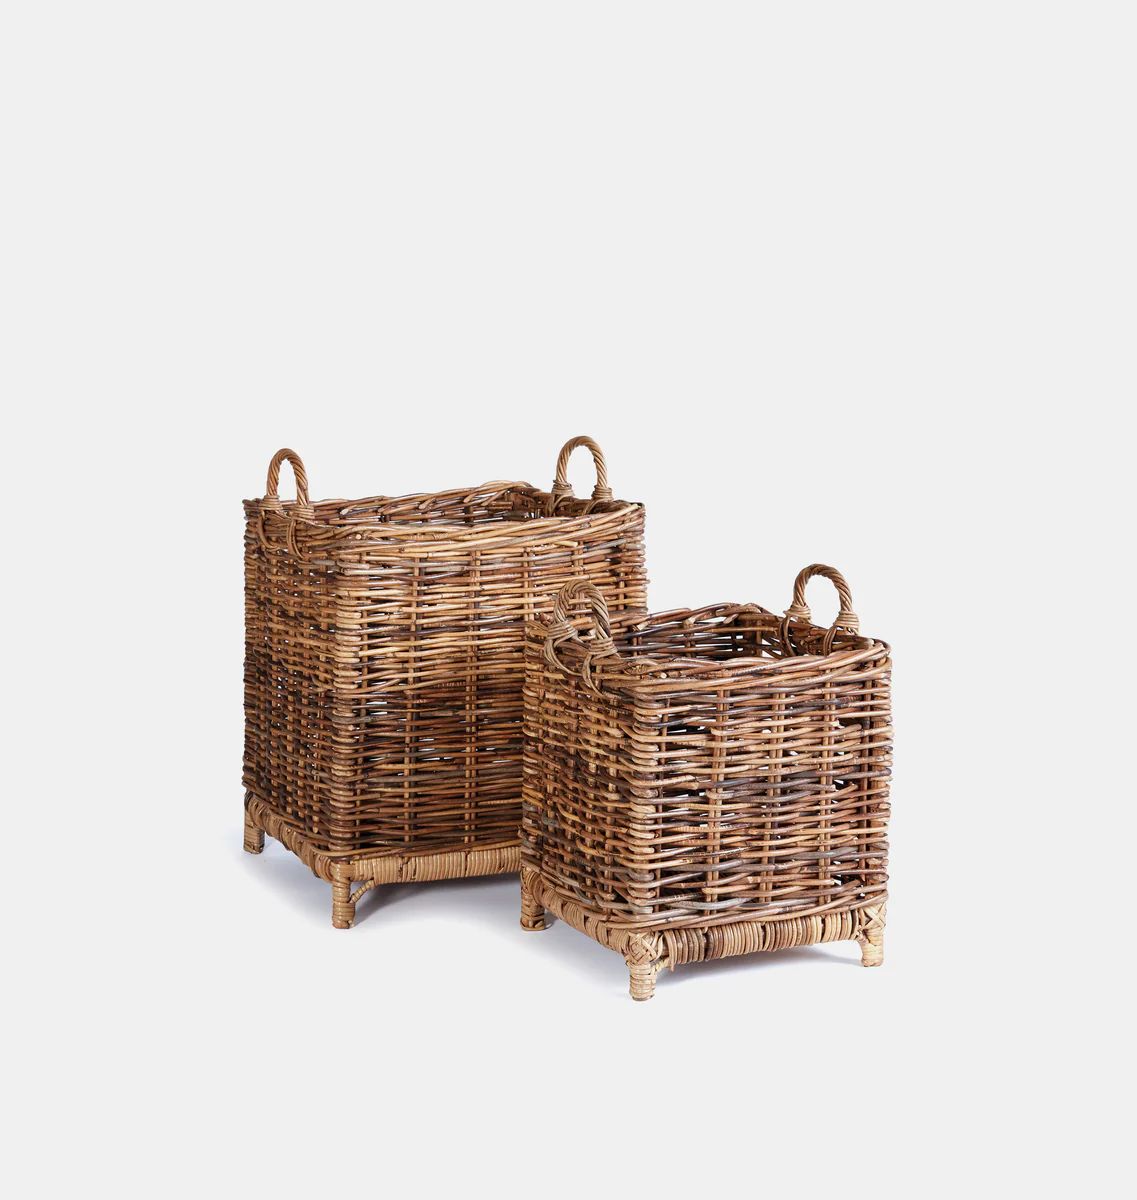 Footed Rattan Basket S/2 | Shoppe Amber Interiors | Amber Interiors